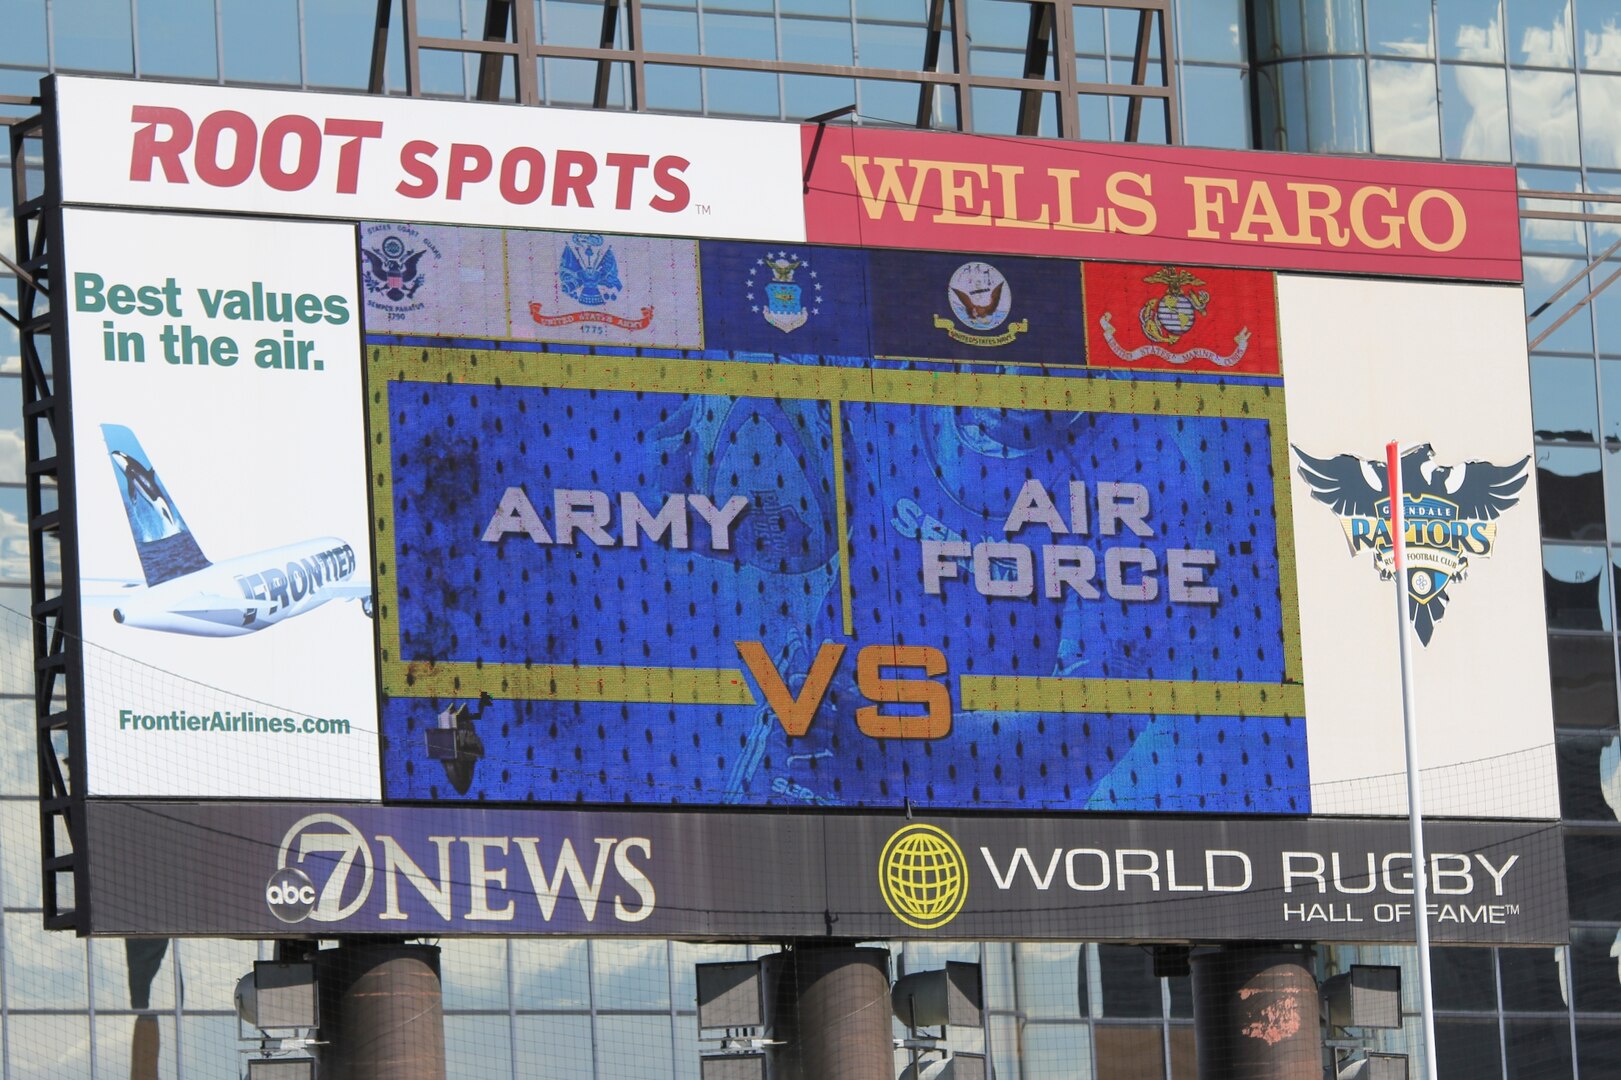 Army and Air Force face off for the second straight year at the 2014 Armed Forces Rugby 7’s Championship in Glendale, Colo. 15-17 August.